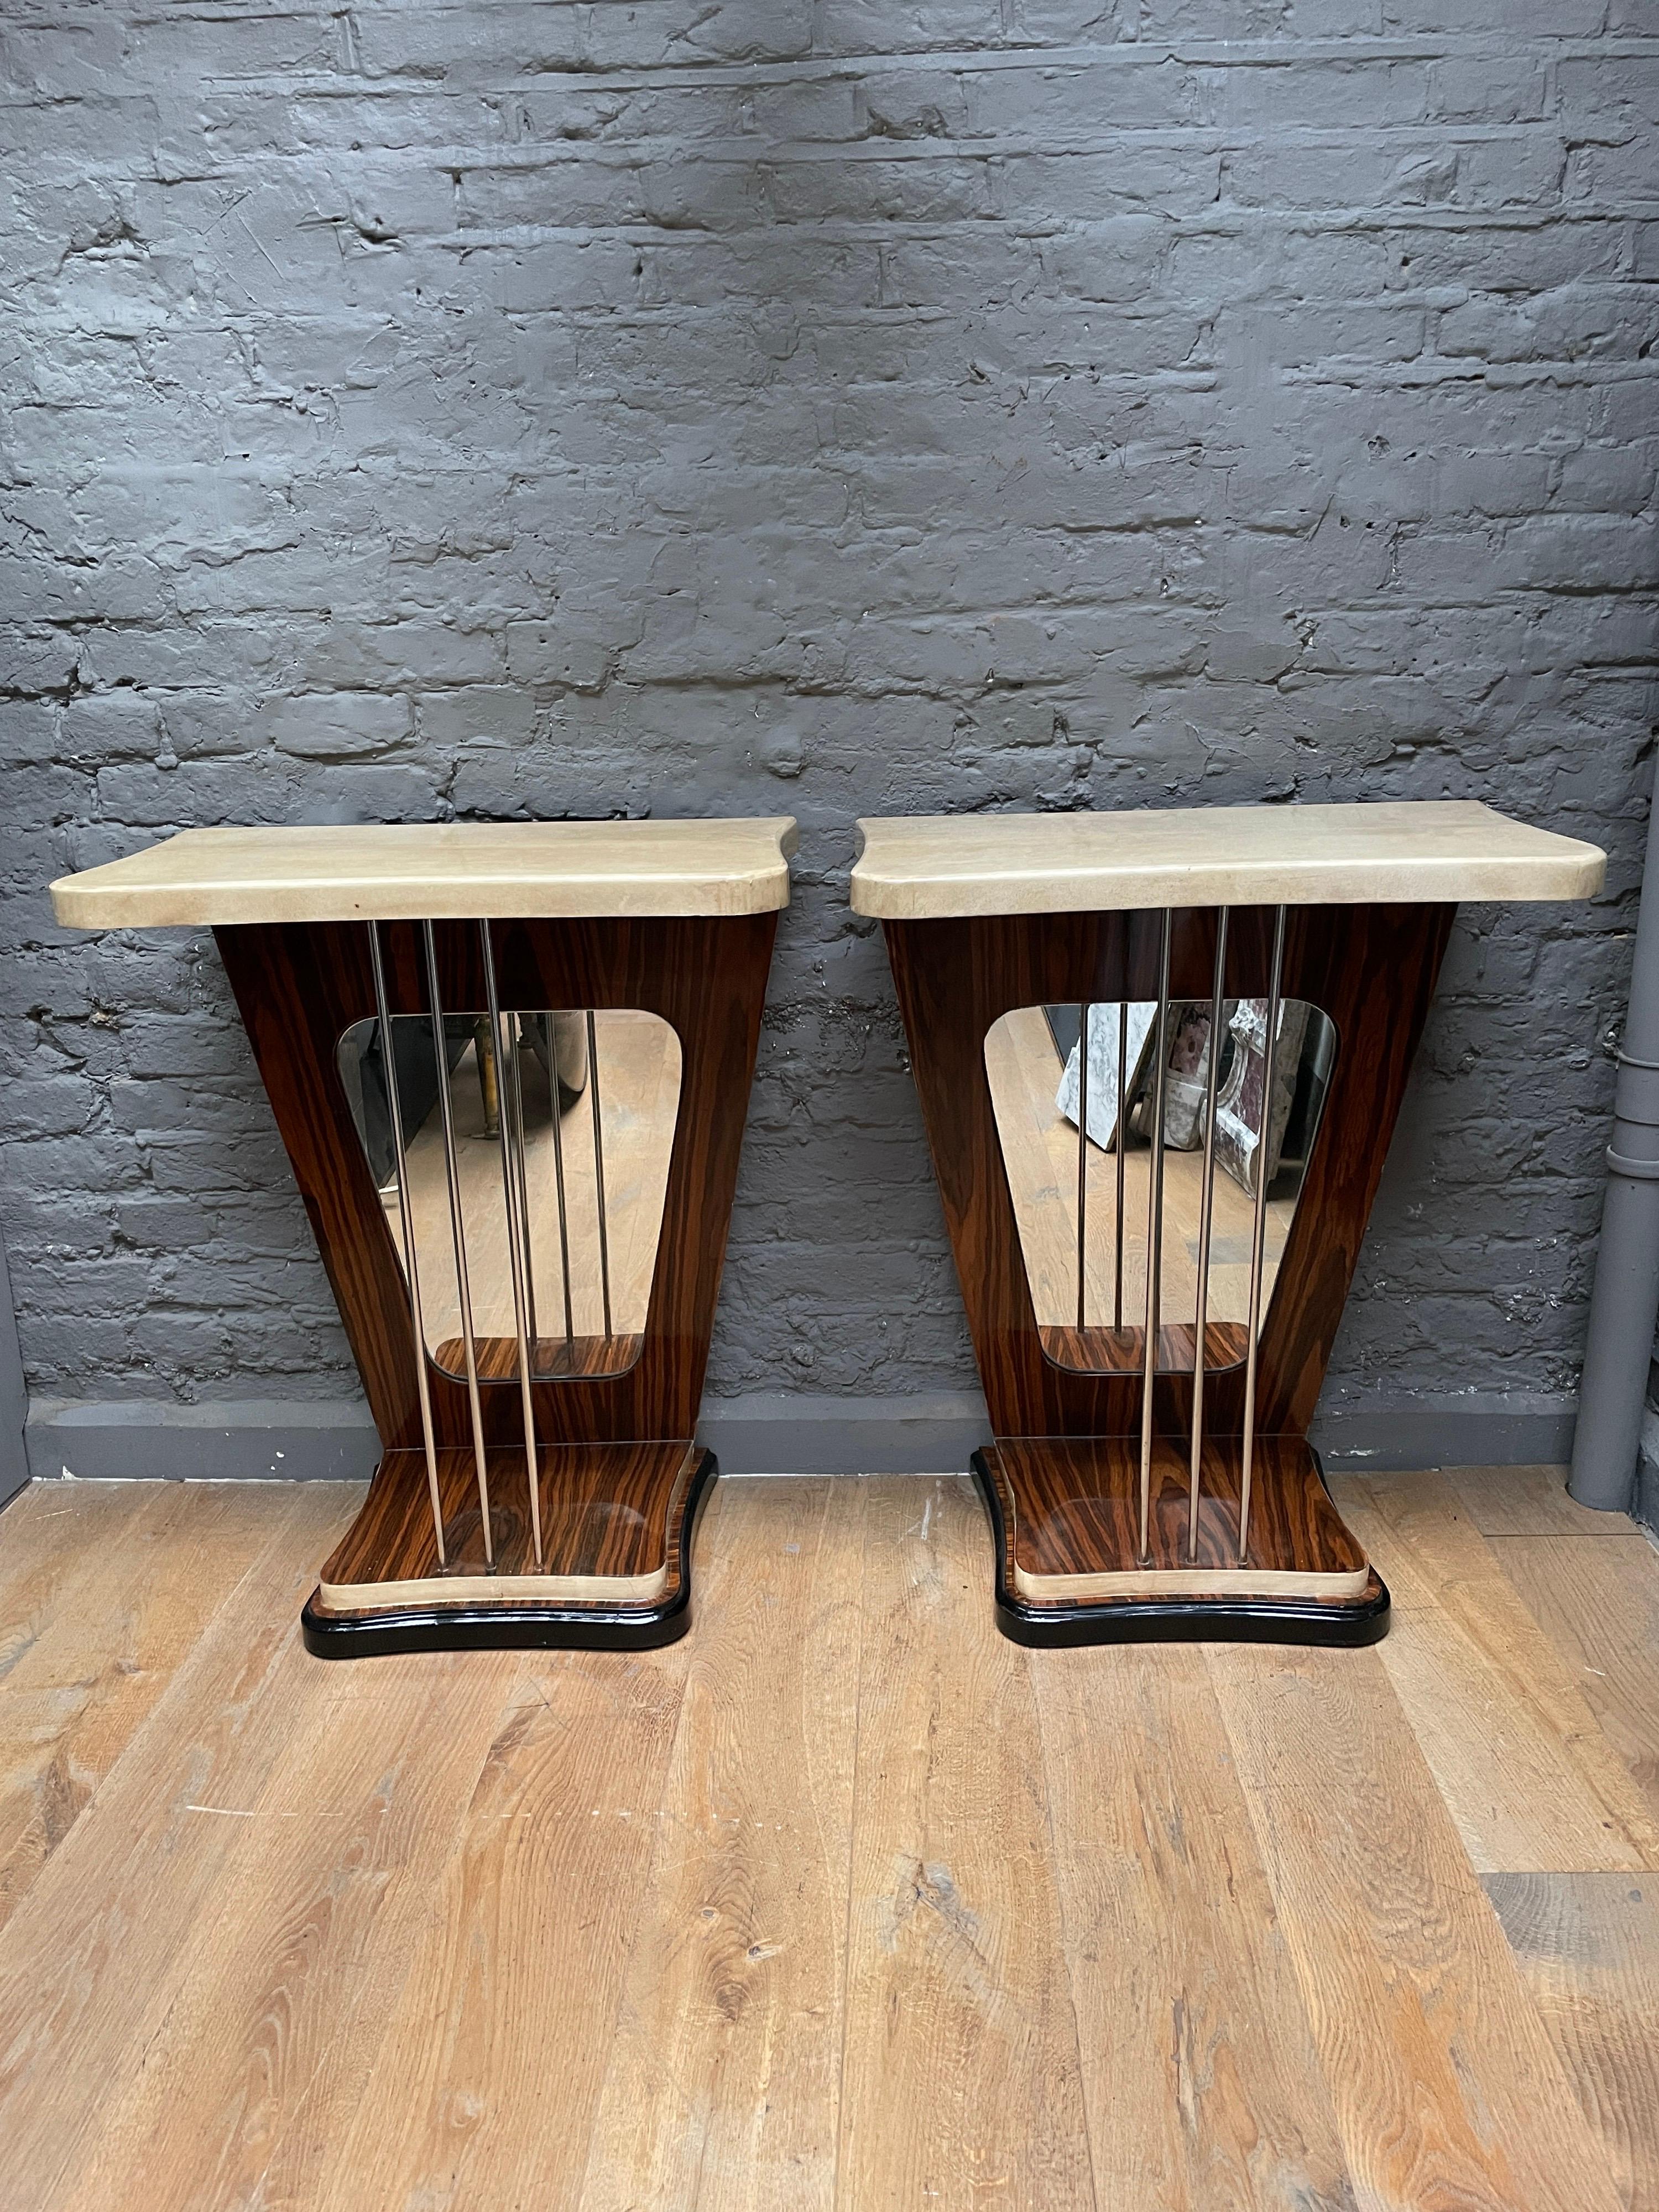 A pair of console tables with cream lacquered goatskin tops and edges, Palasander uprights and feet supported on an ebonized base. The shaped mirror inserts with supporting bars from base to top. A very stylised and typically Italian 50's pair of